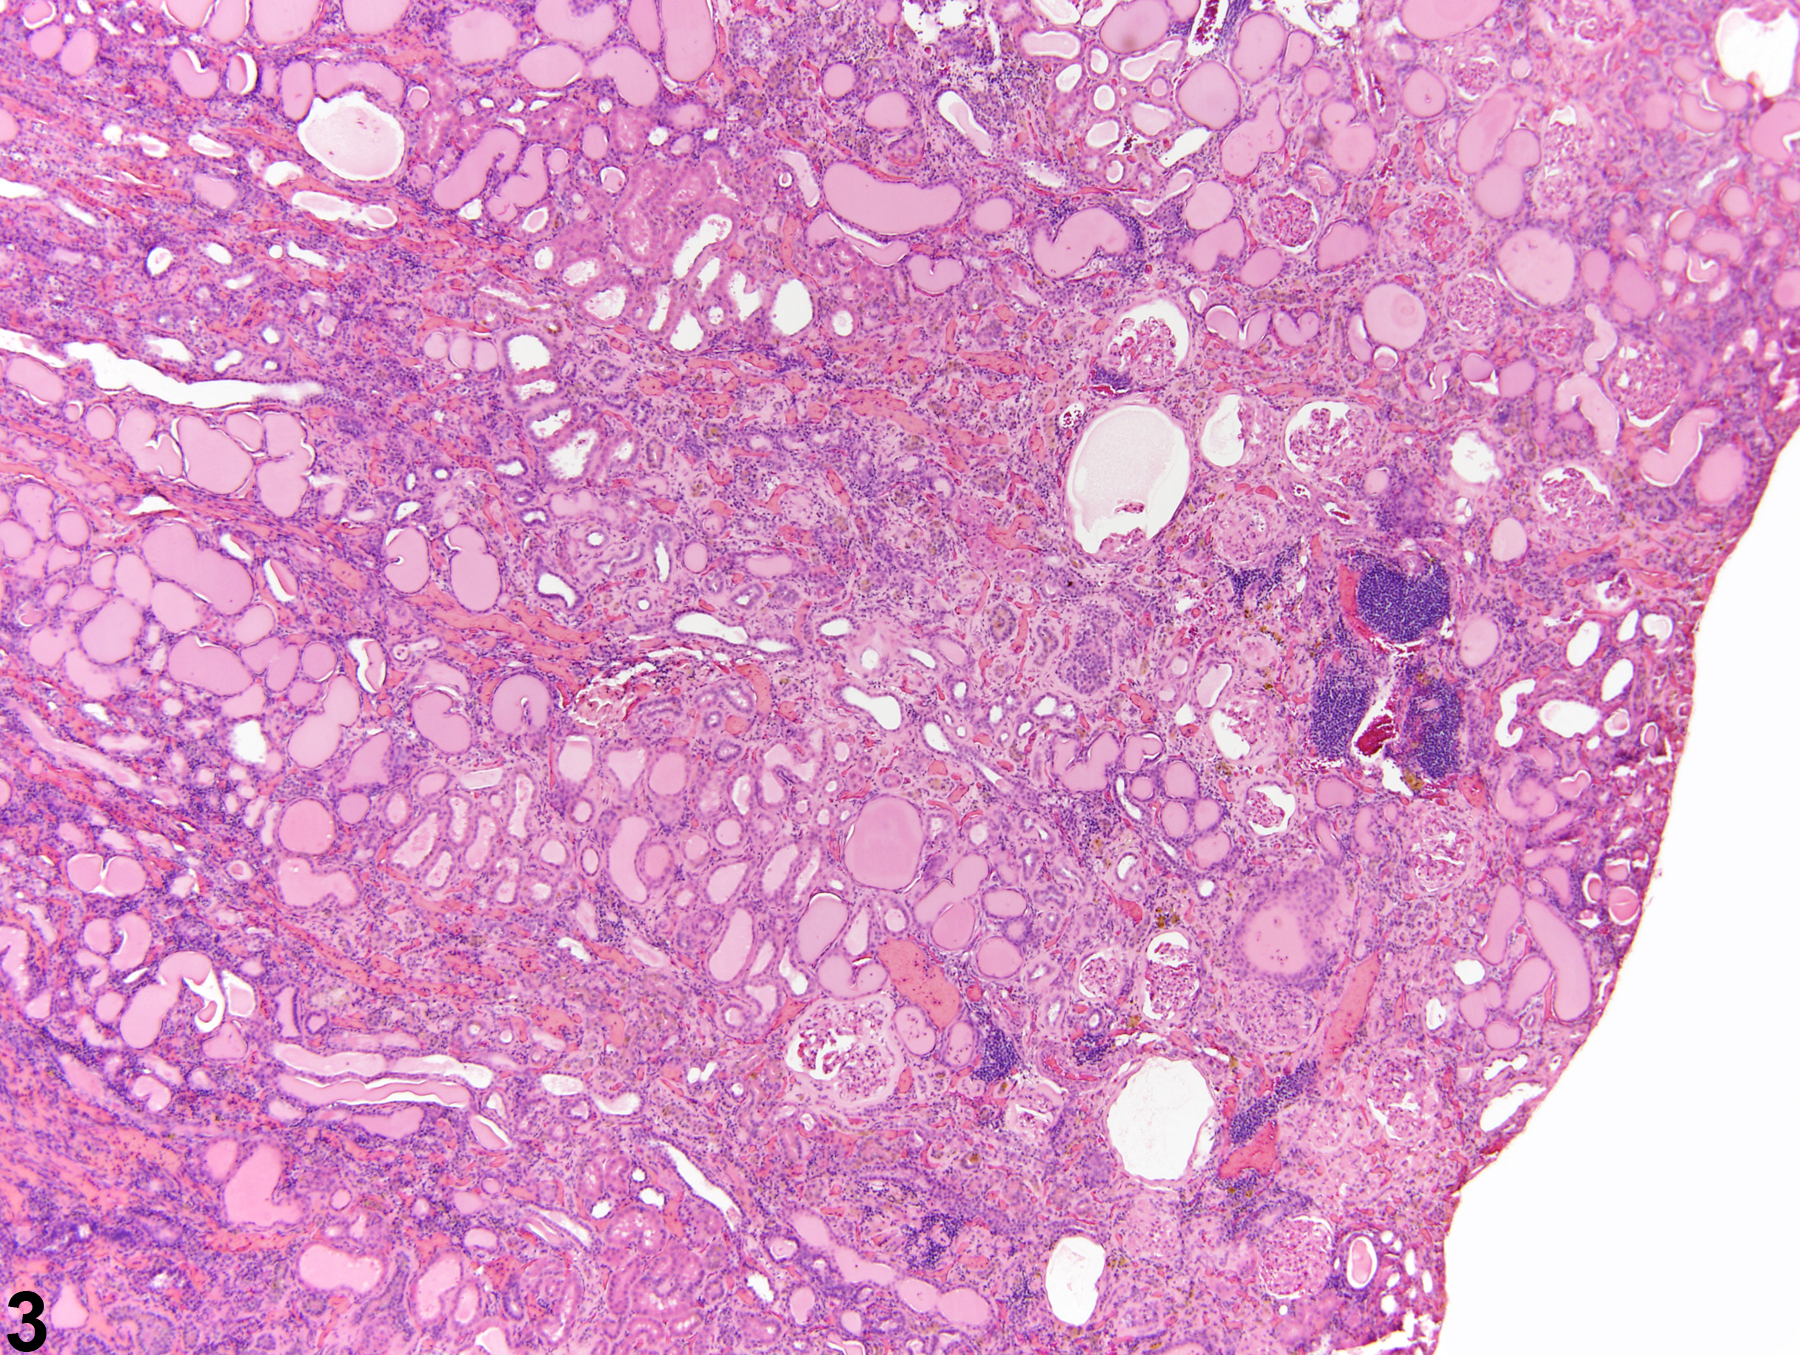 Image of nephropathy, chronic progressive in the kidney from a male F344/N rat in a chronic study